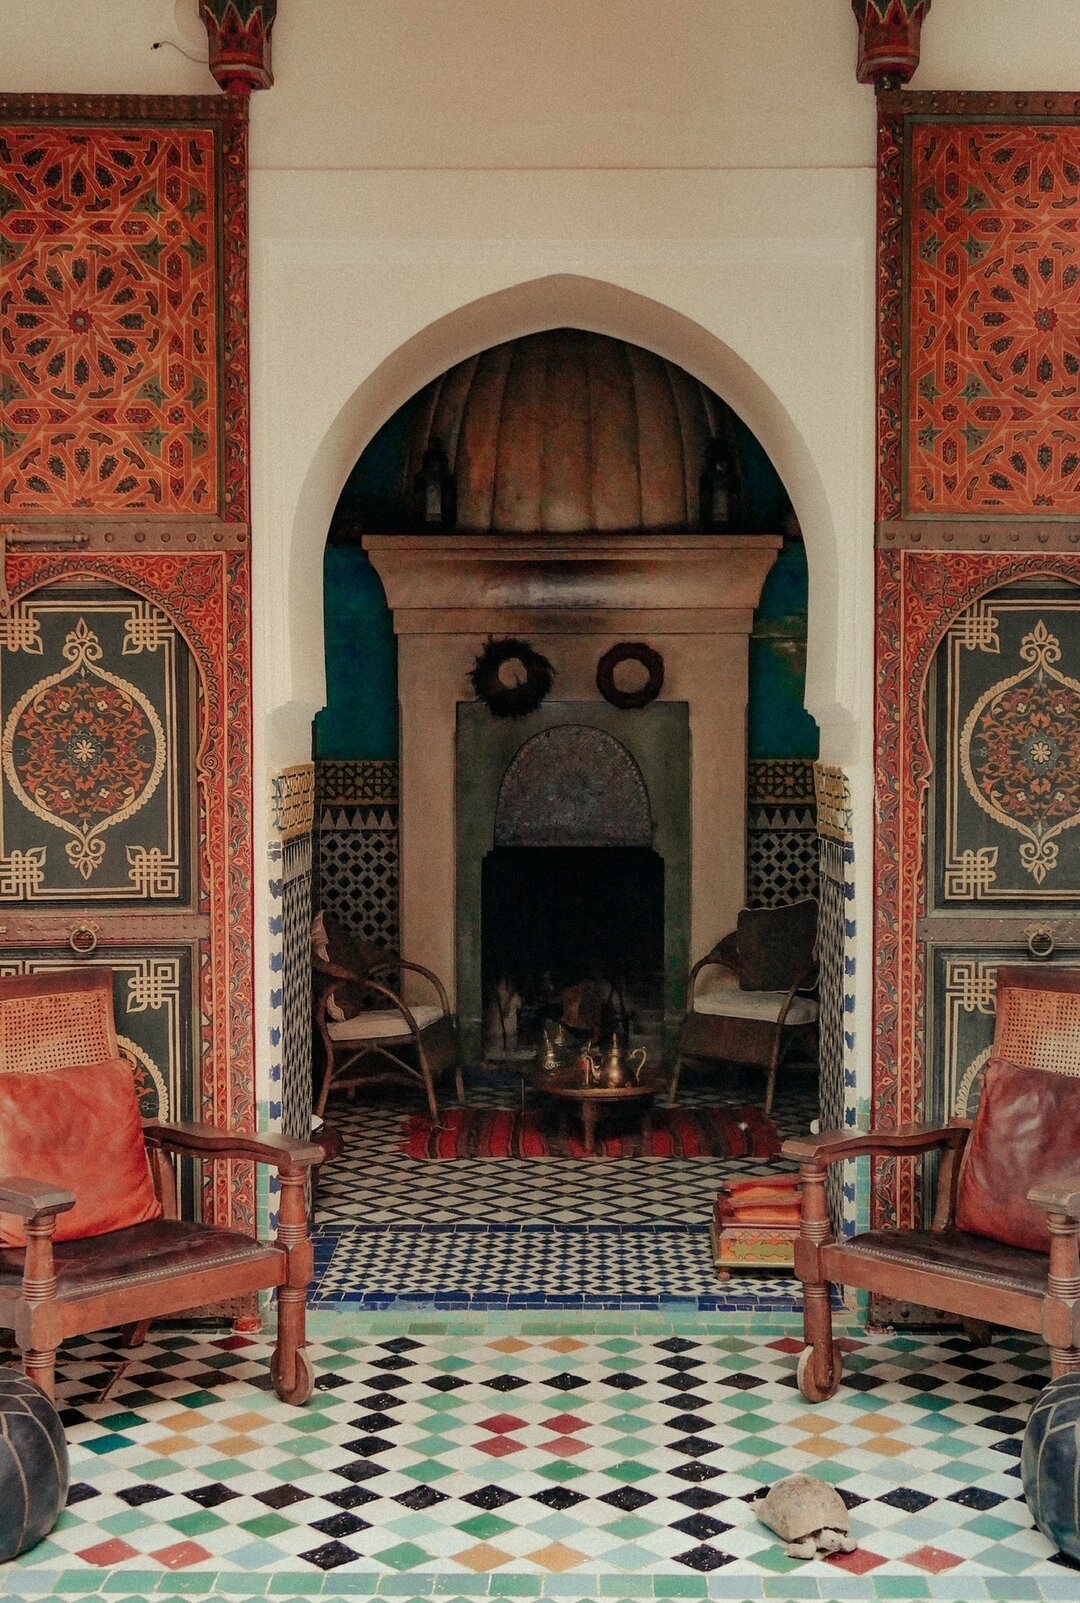 Experience the charm and elegance of a traditional Riad in Morocco. 🌴🇲🇦 From intricate tile work to cozy courtyards, every Riad has its own unique personality and style! 😍✨🐢​​​​​​​​
.​​​​​​​​
.​​​​​​​​
.​​​​​​​​
#Morocco #Riad #Lifestyle #Travel